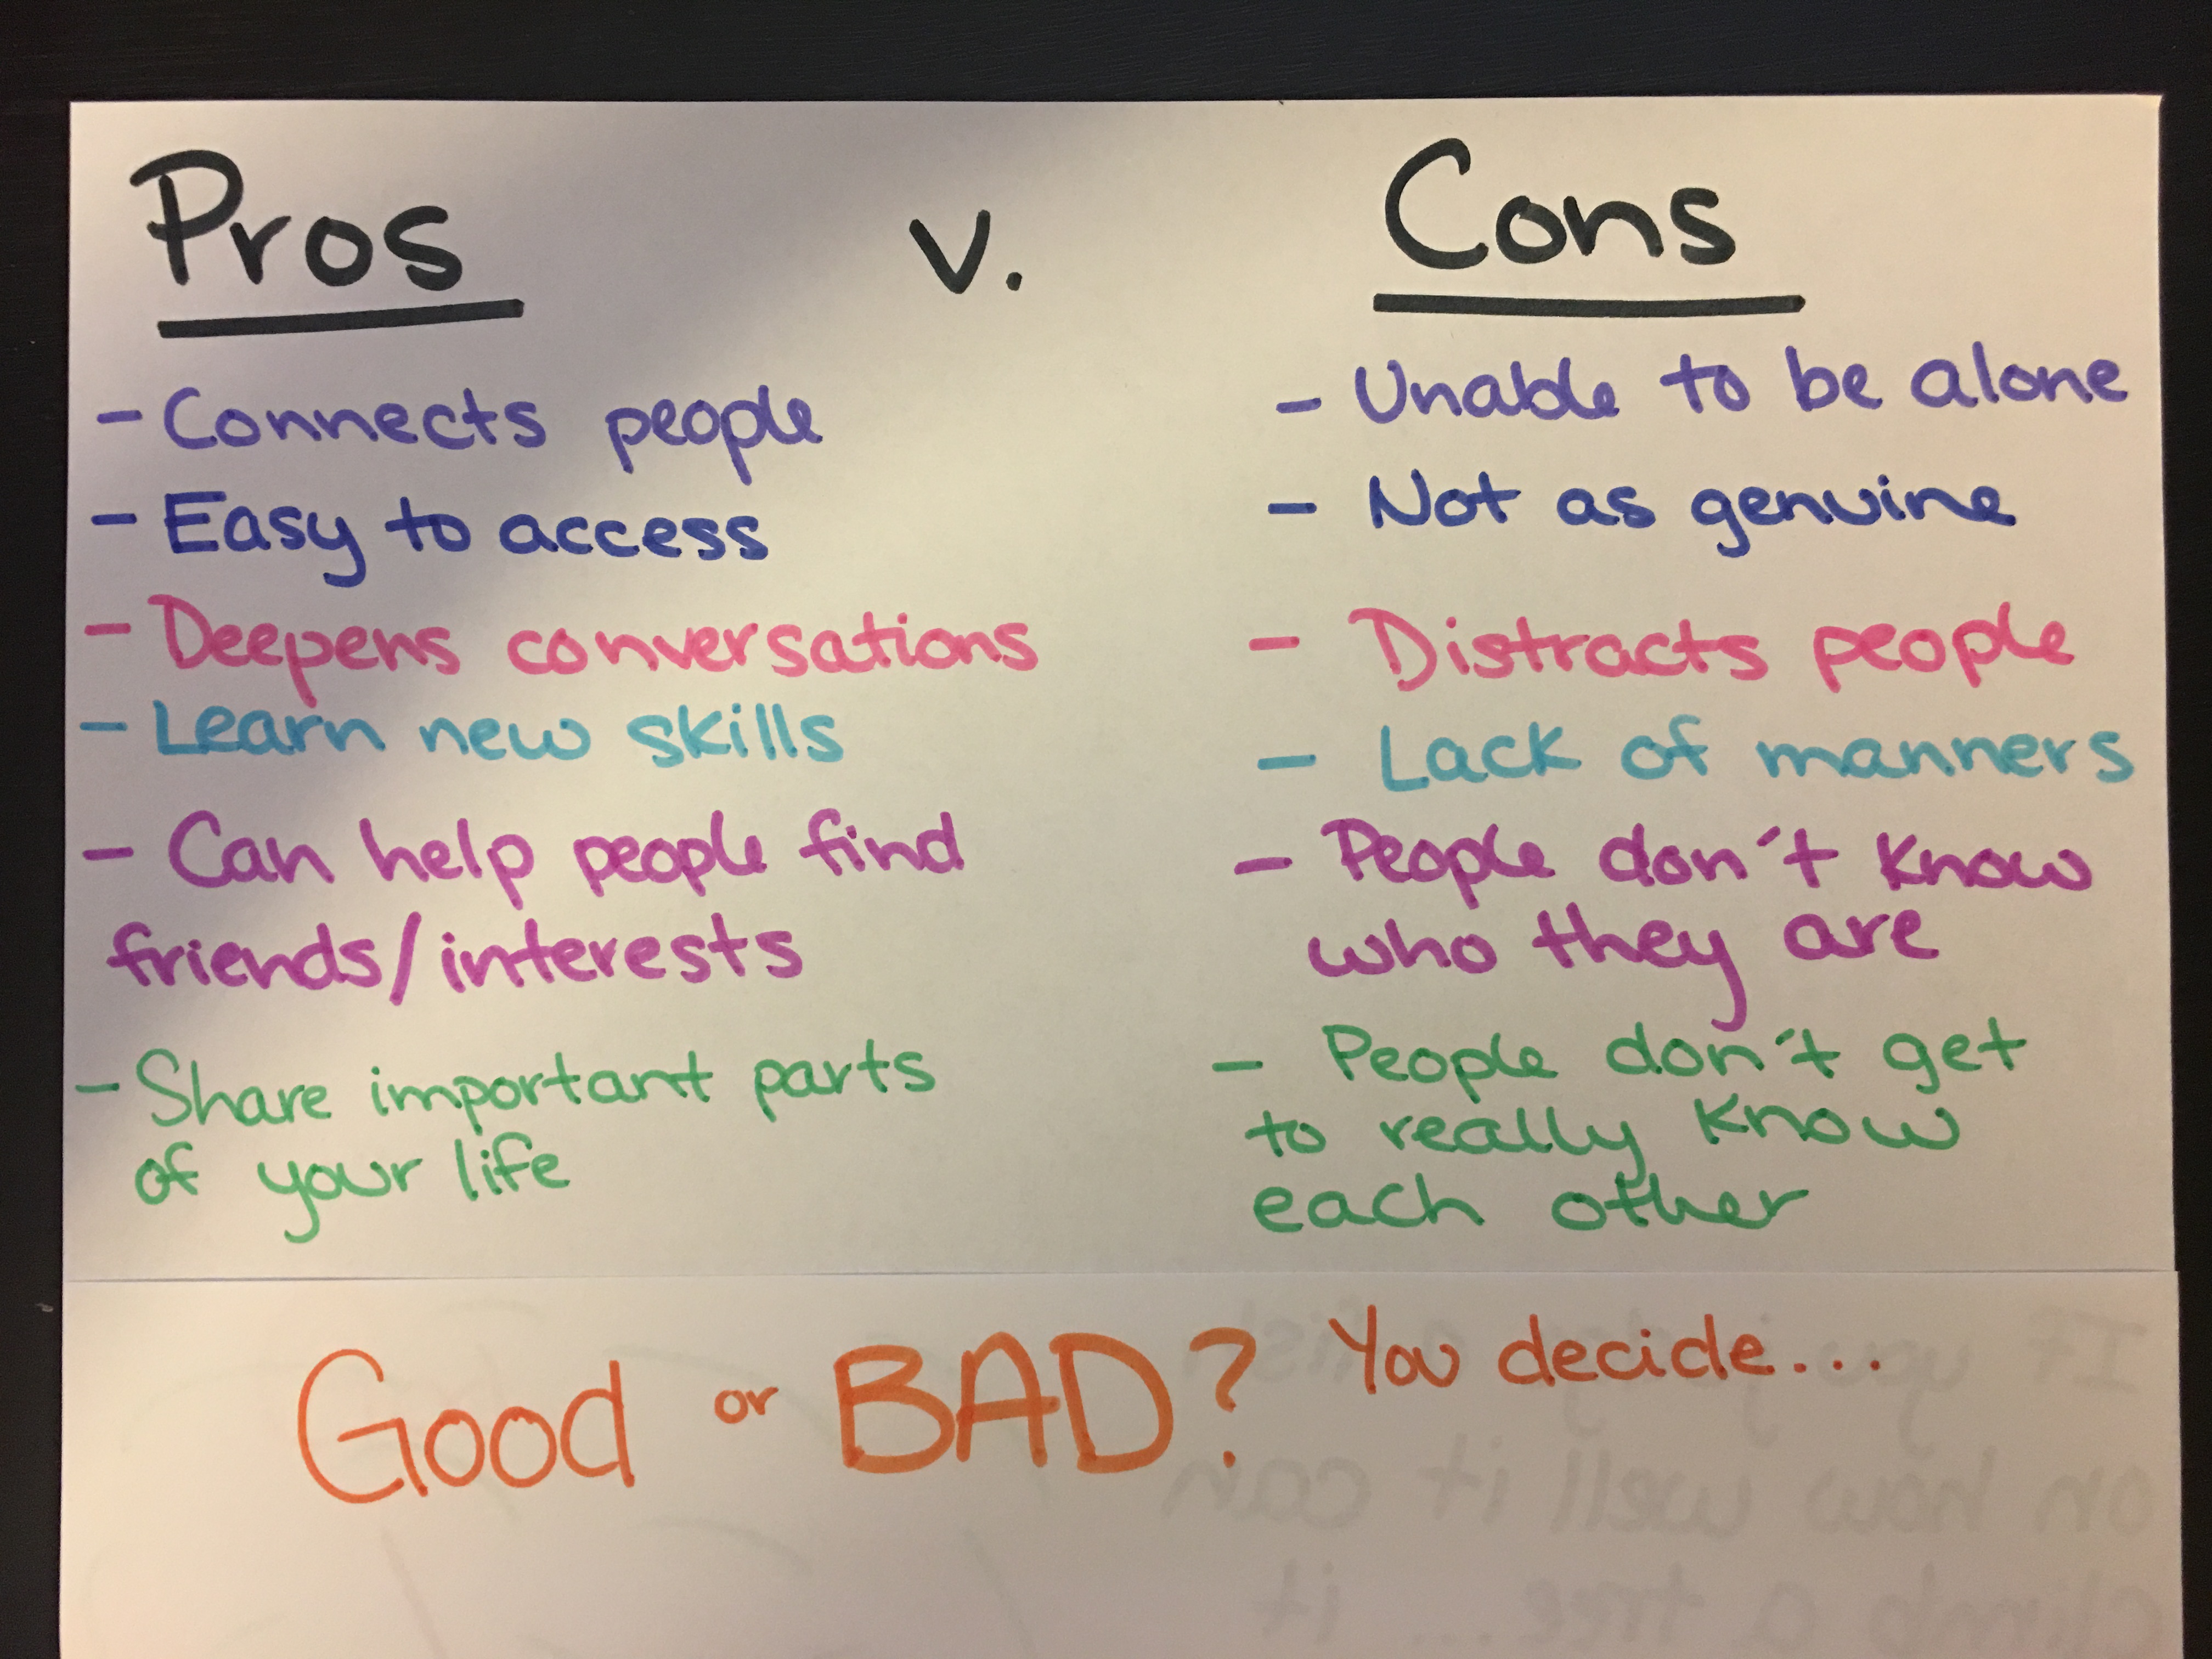 3. Pros and Cons of Using the System